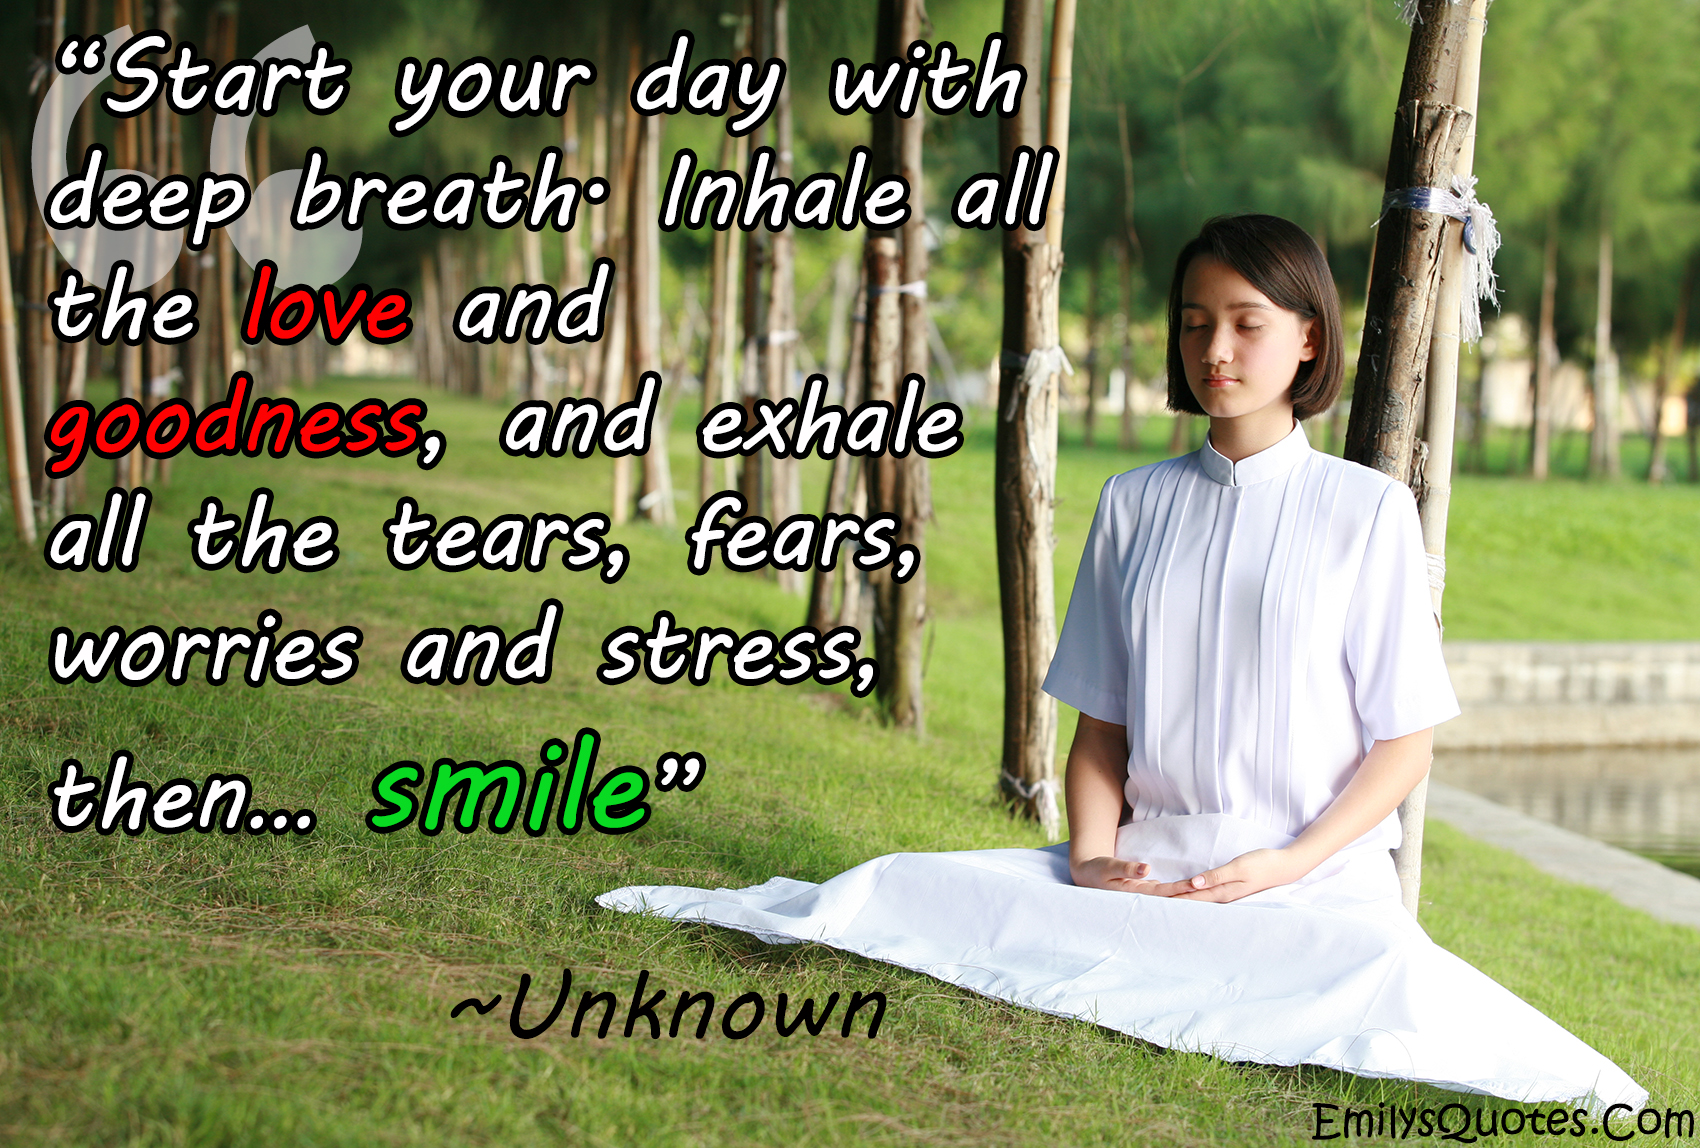 Start your day with deep breath. Inhale all the love and goodness, and exhale all the tears, fears, worries and stress, then… smile